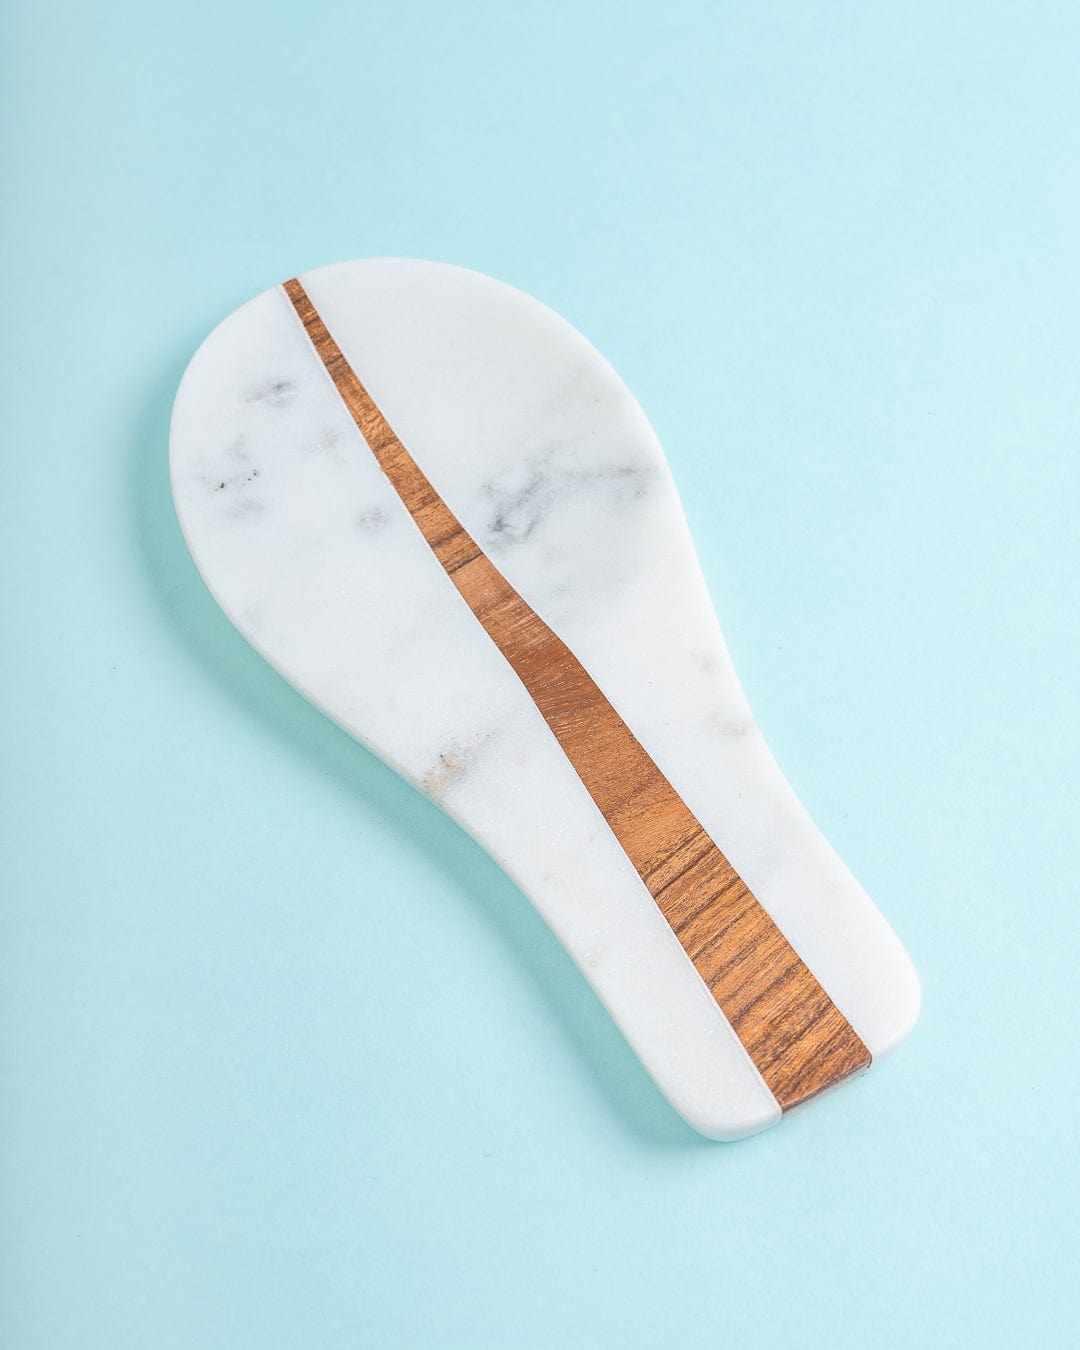 Marble & Inlay Wood Spoon rest